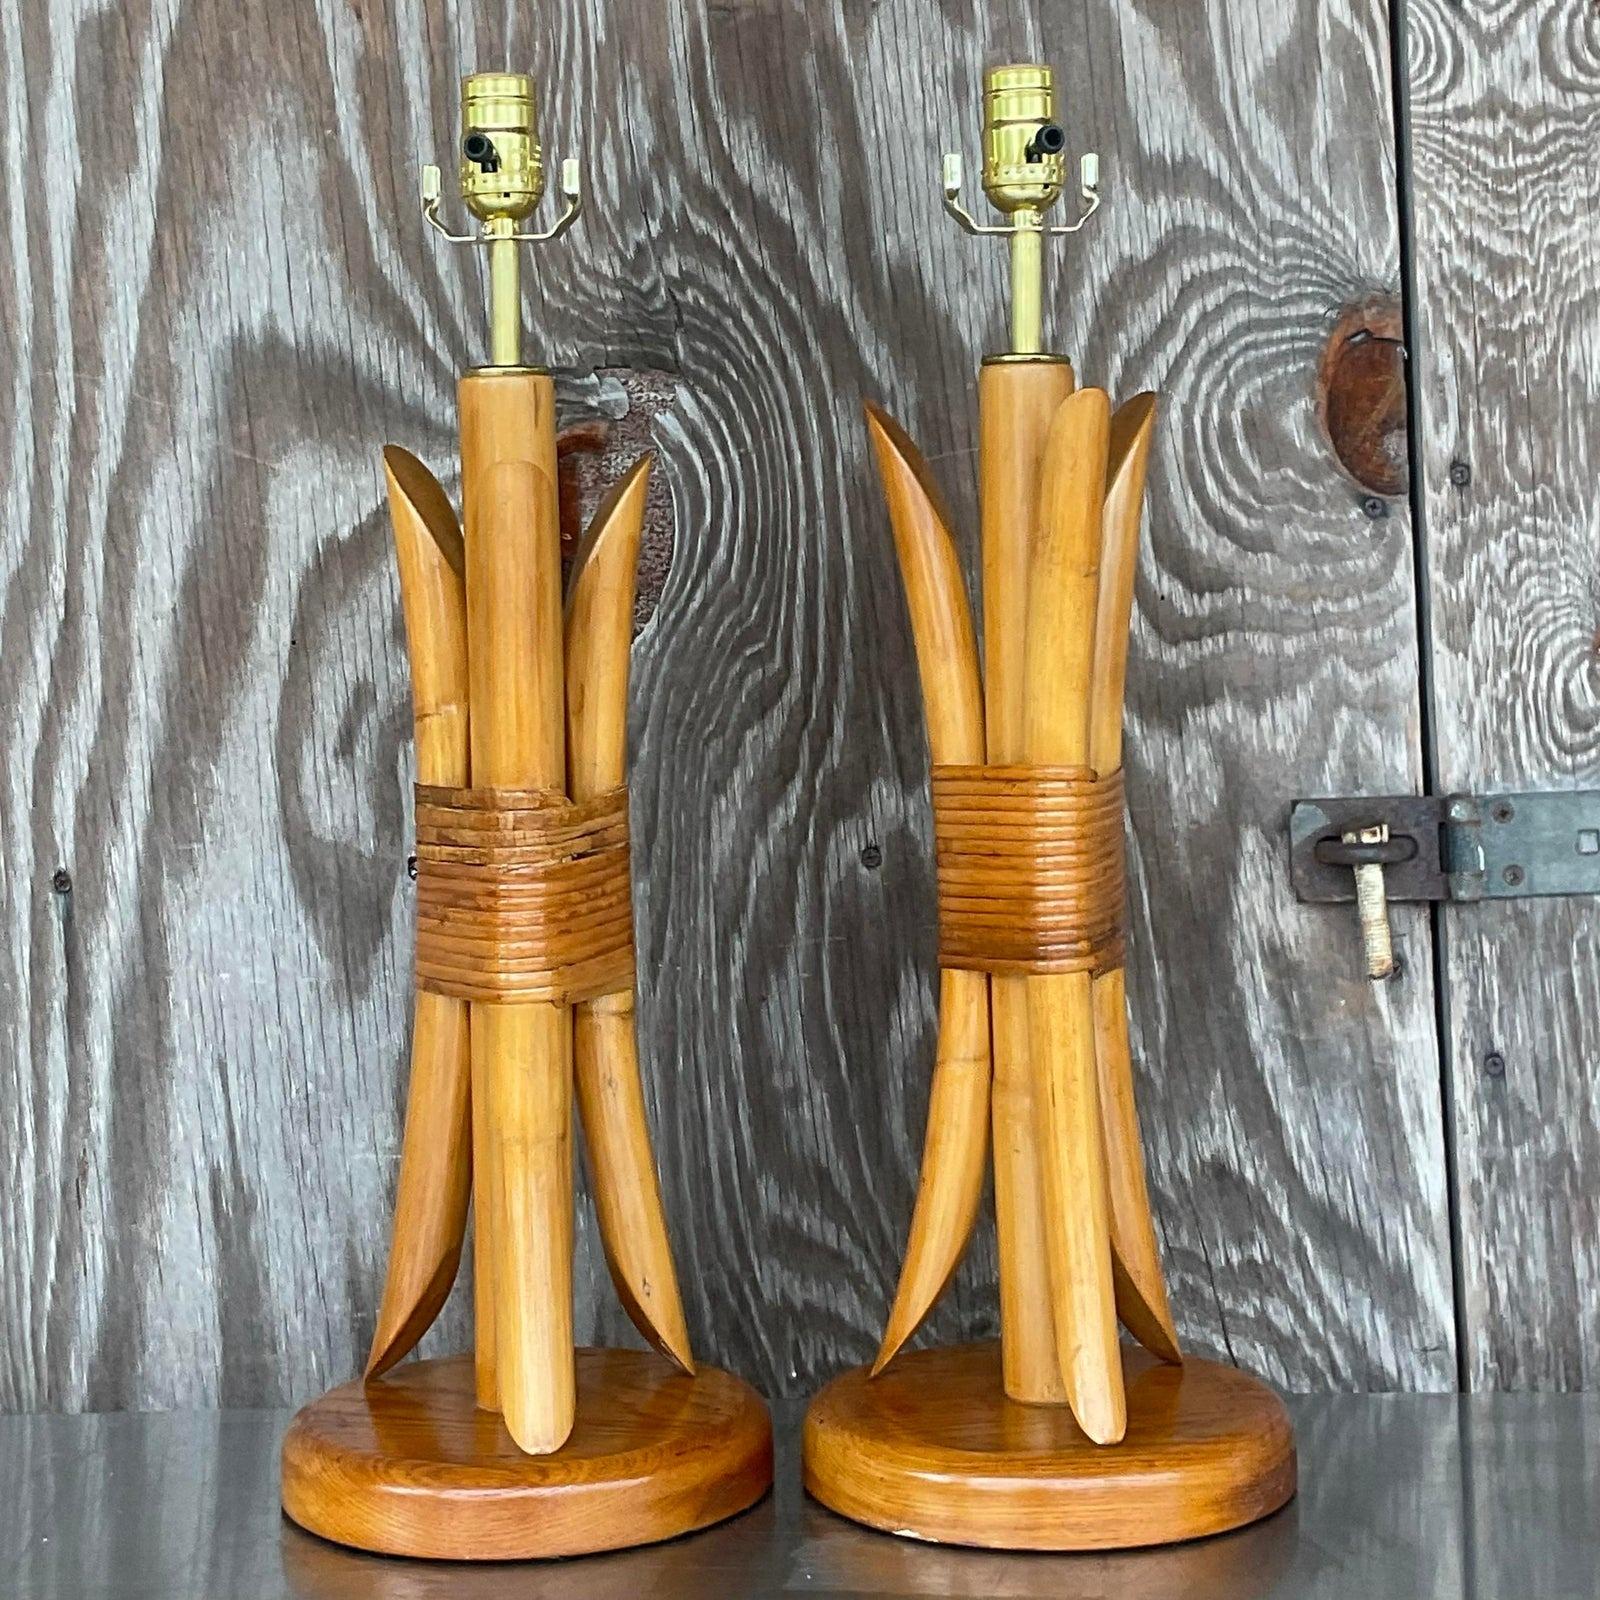 20th Century Vintage Coastal Wrapped Rattan Table Lamps - a Pair For Sale